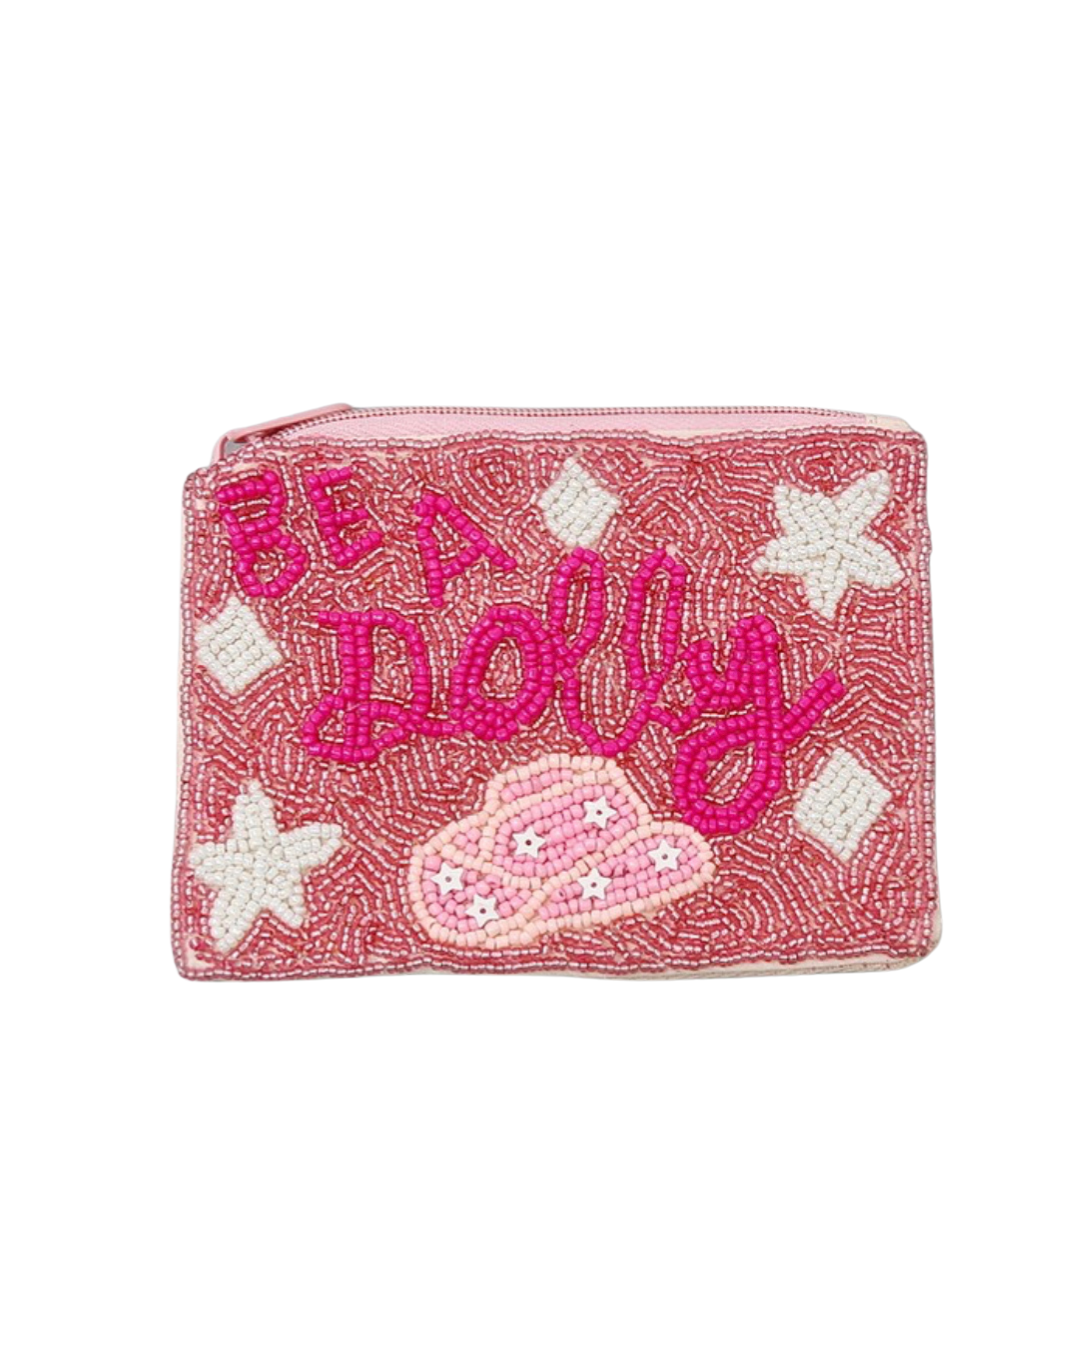 Juicy Couture 🆕️❤️ NWT Red Heart Wristlet Valentine Logo Coin Purse ❤️🆕️  - $29 New With Tags - From Shujaur